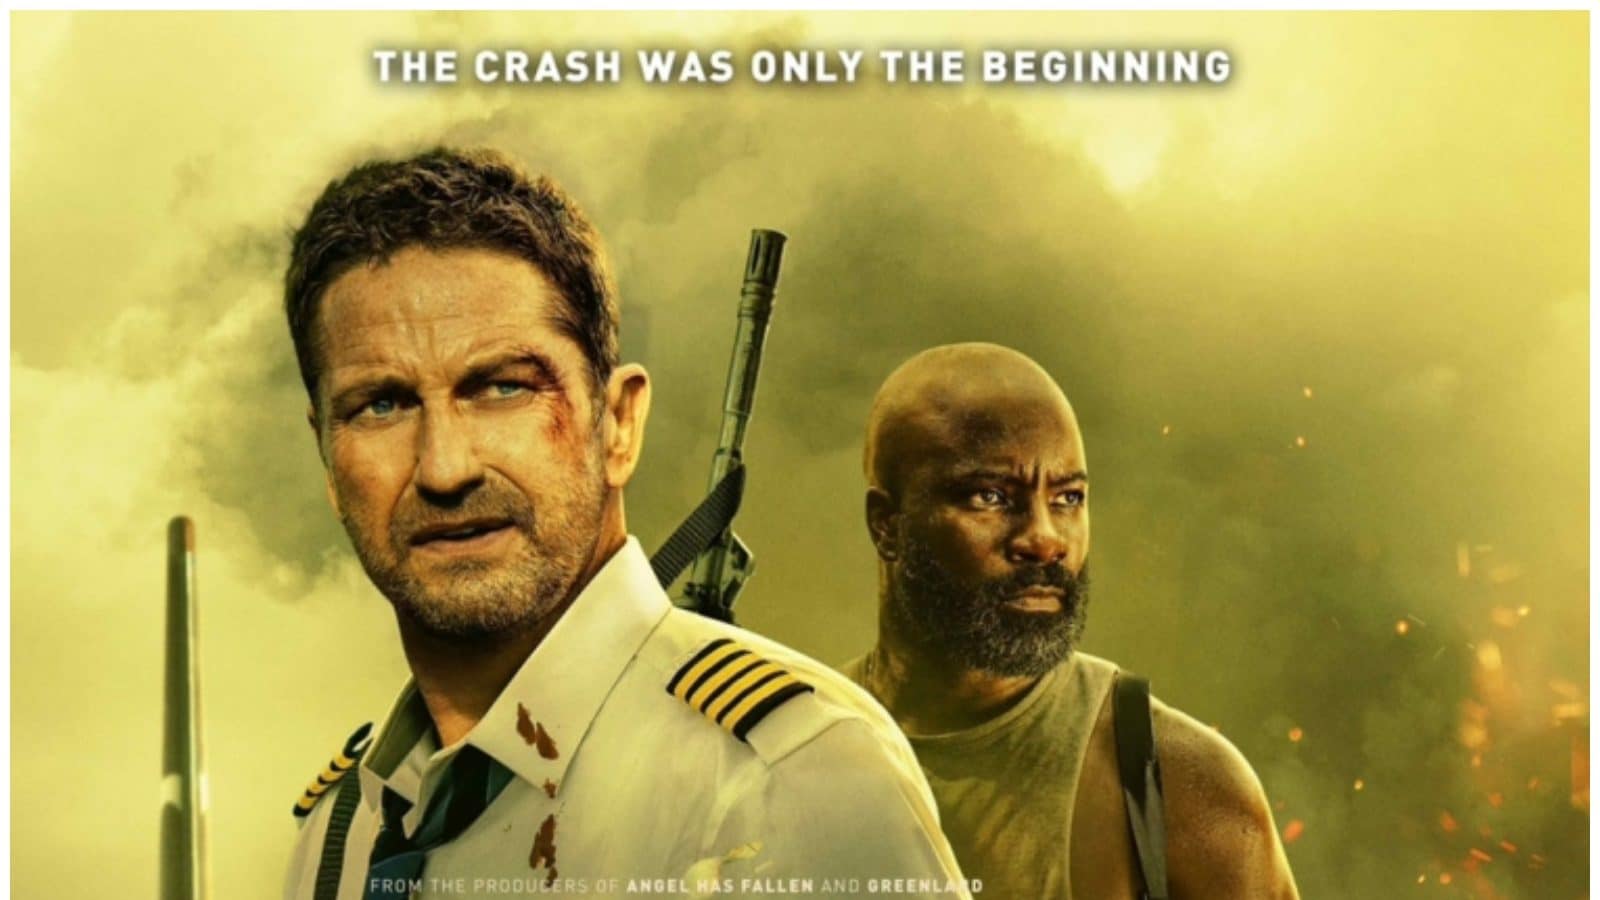 Gerard Butler Starrer Plane to Release on January 13 in Theatres in India